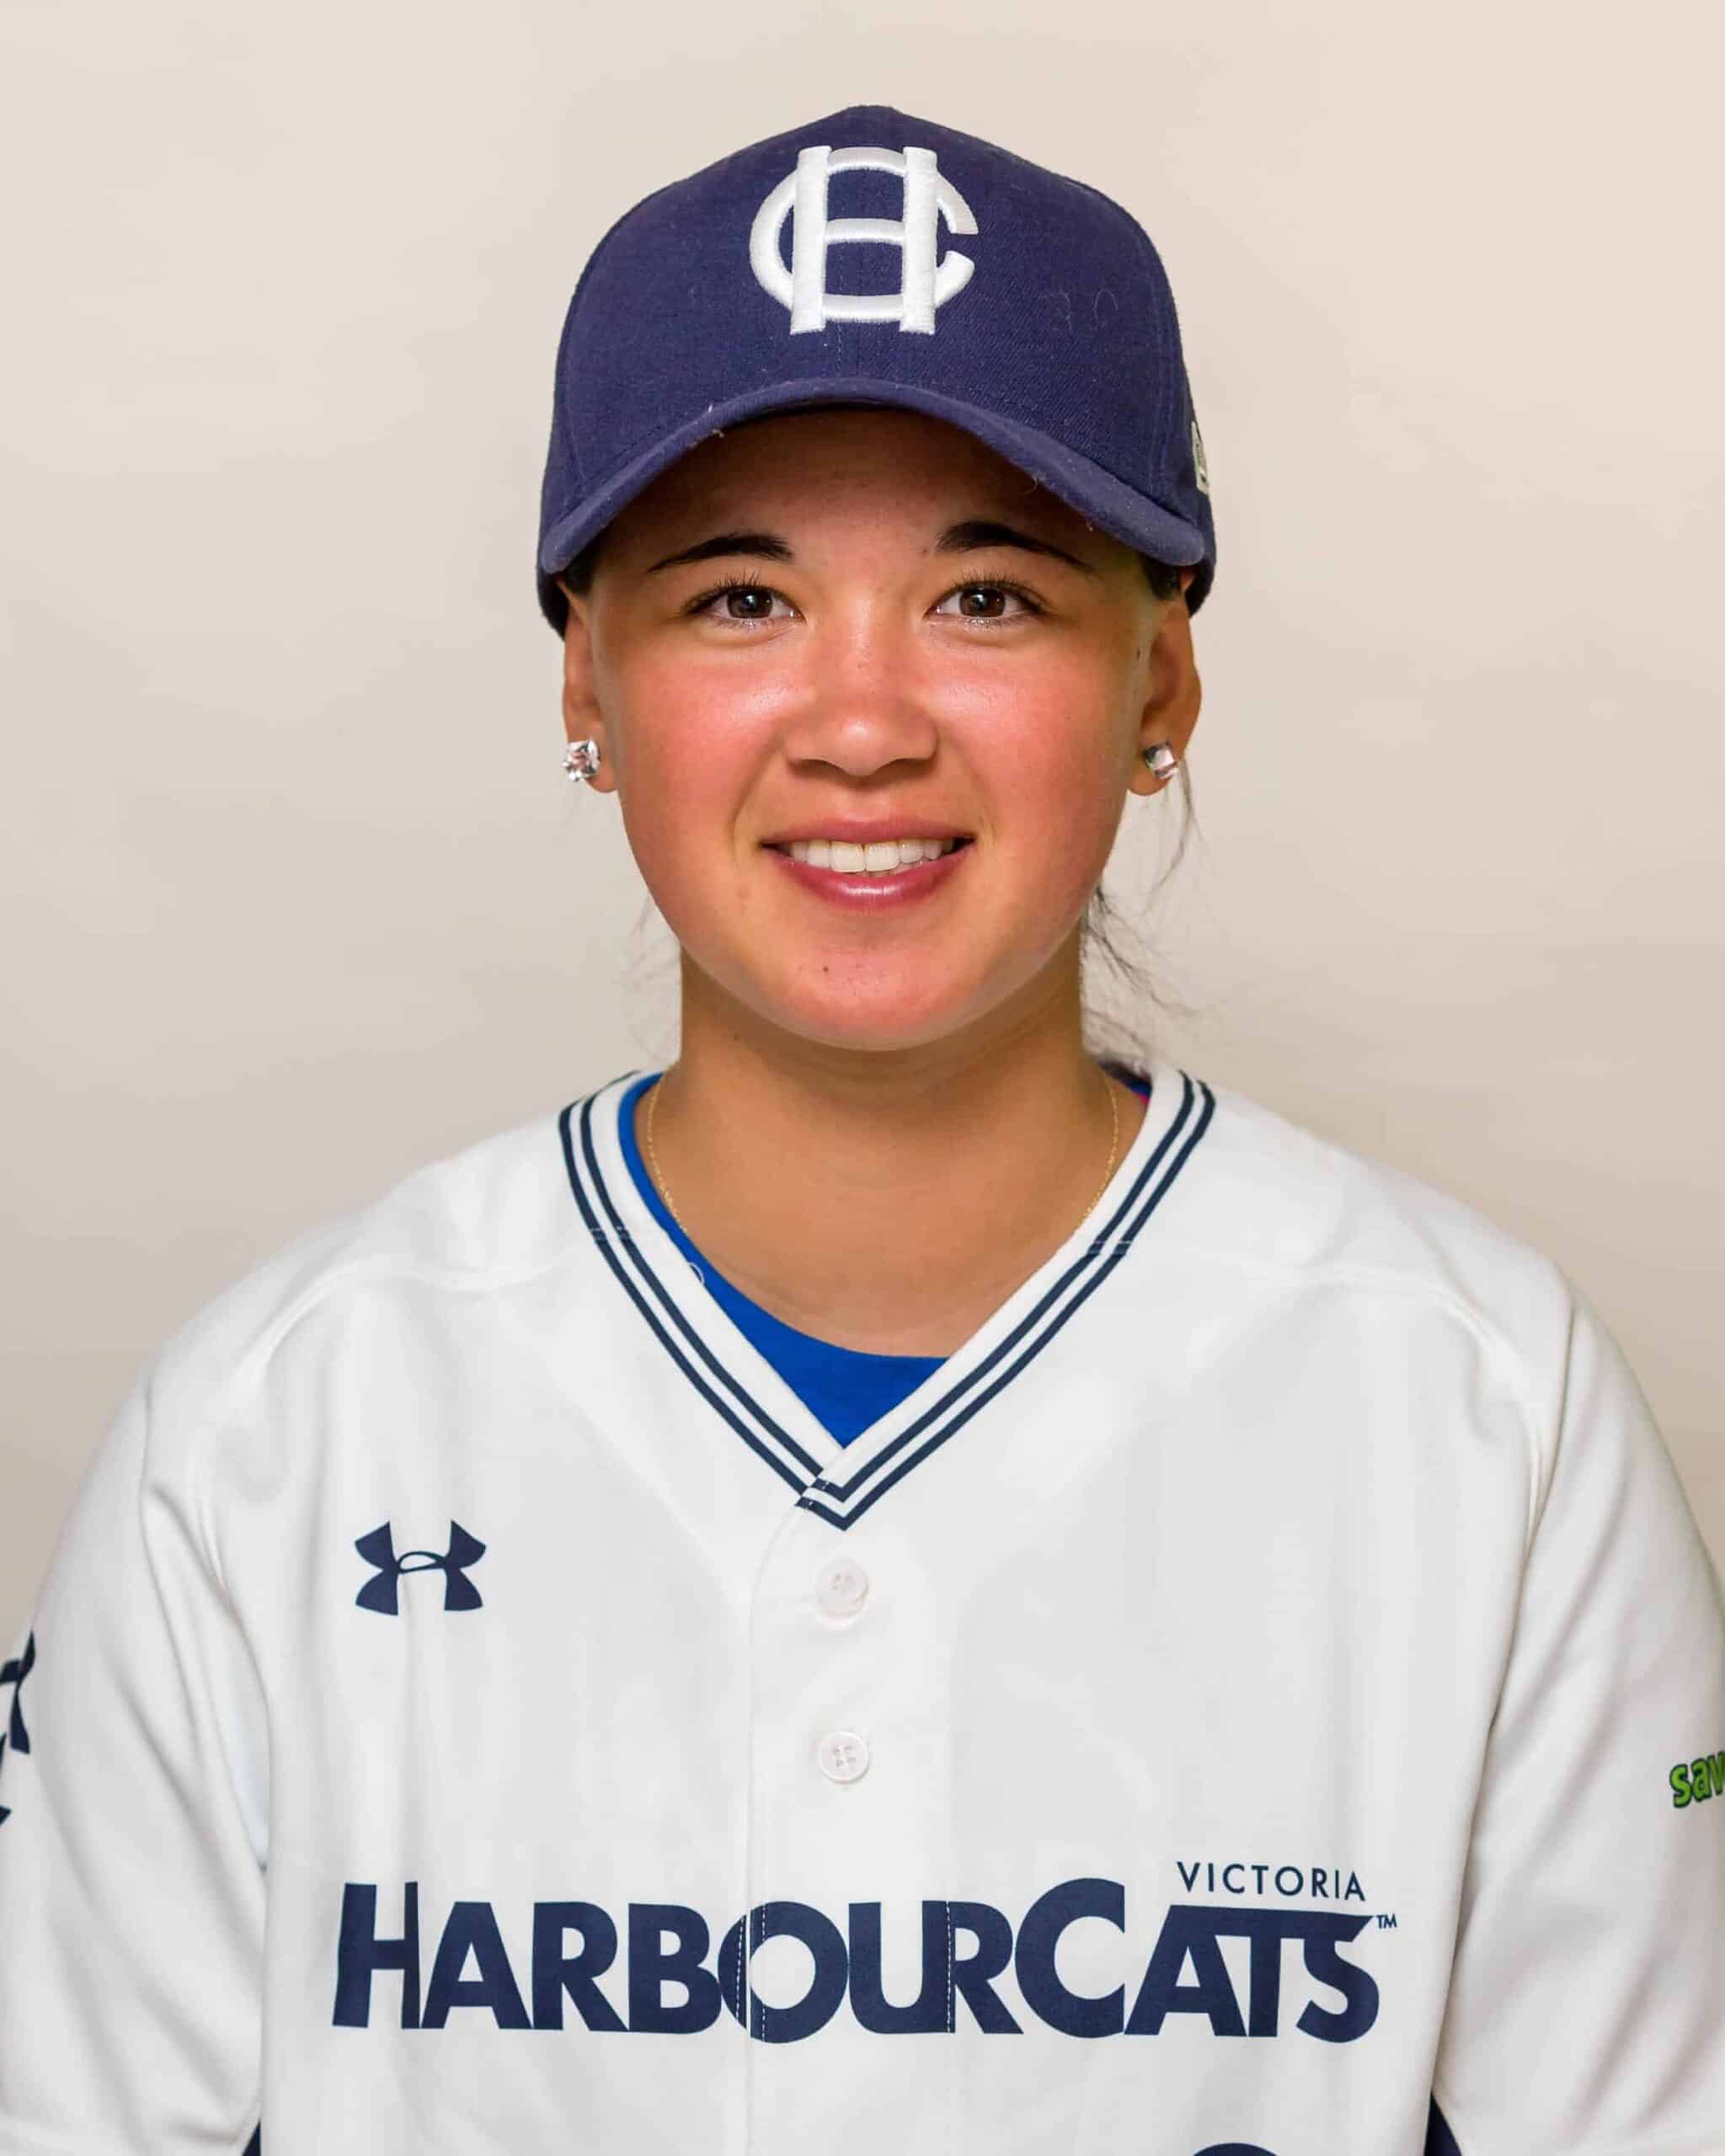 Pitcher Claire Eccles, 19, poses for a photograph at the University of  British Columbia in Vancouver, B.C., on Friday May 12, 2017. The Victoria  HarbourCats announced Tuesday that Eccles will join the